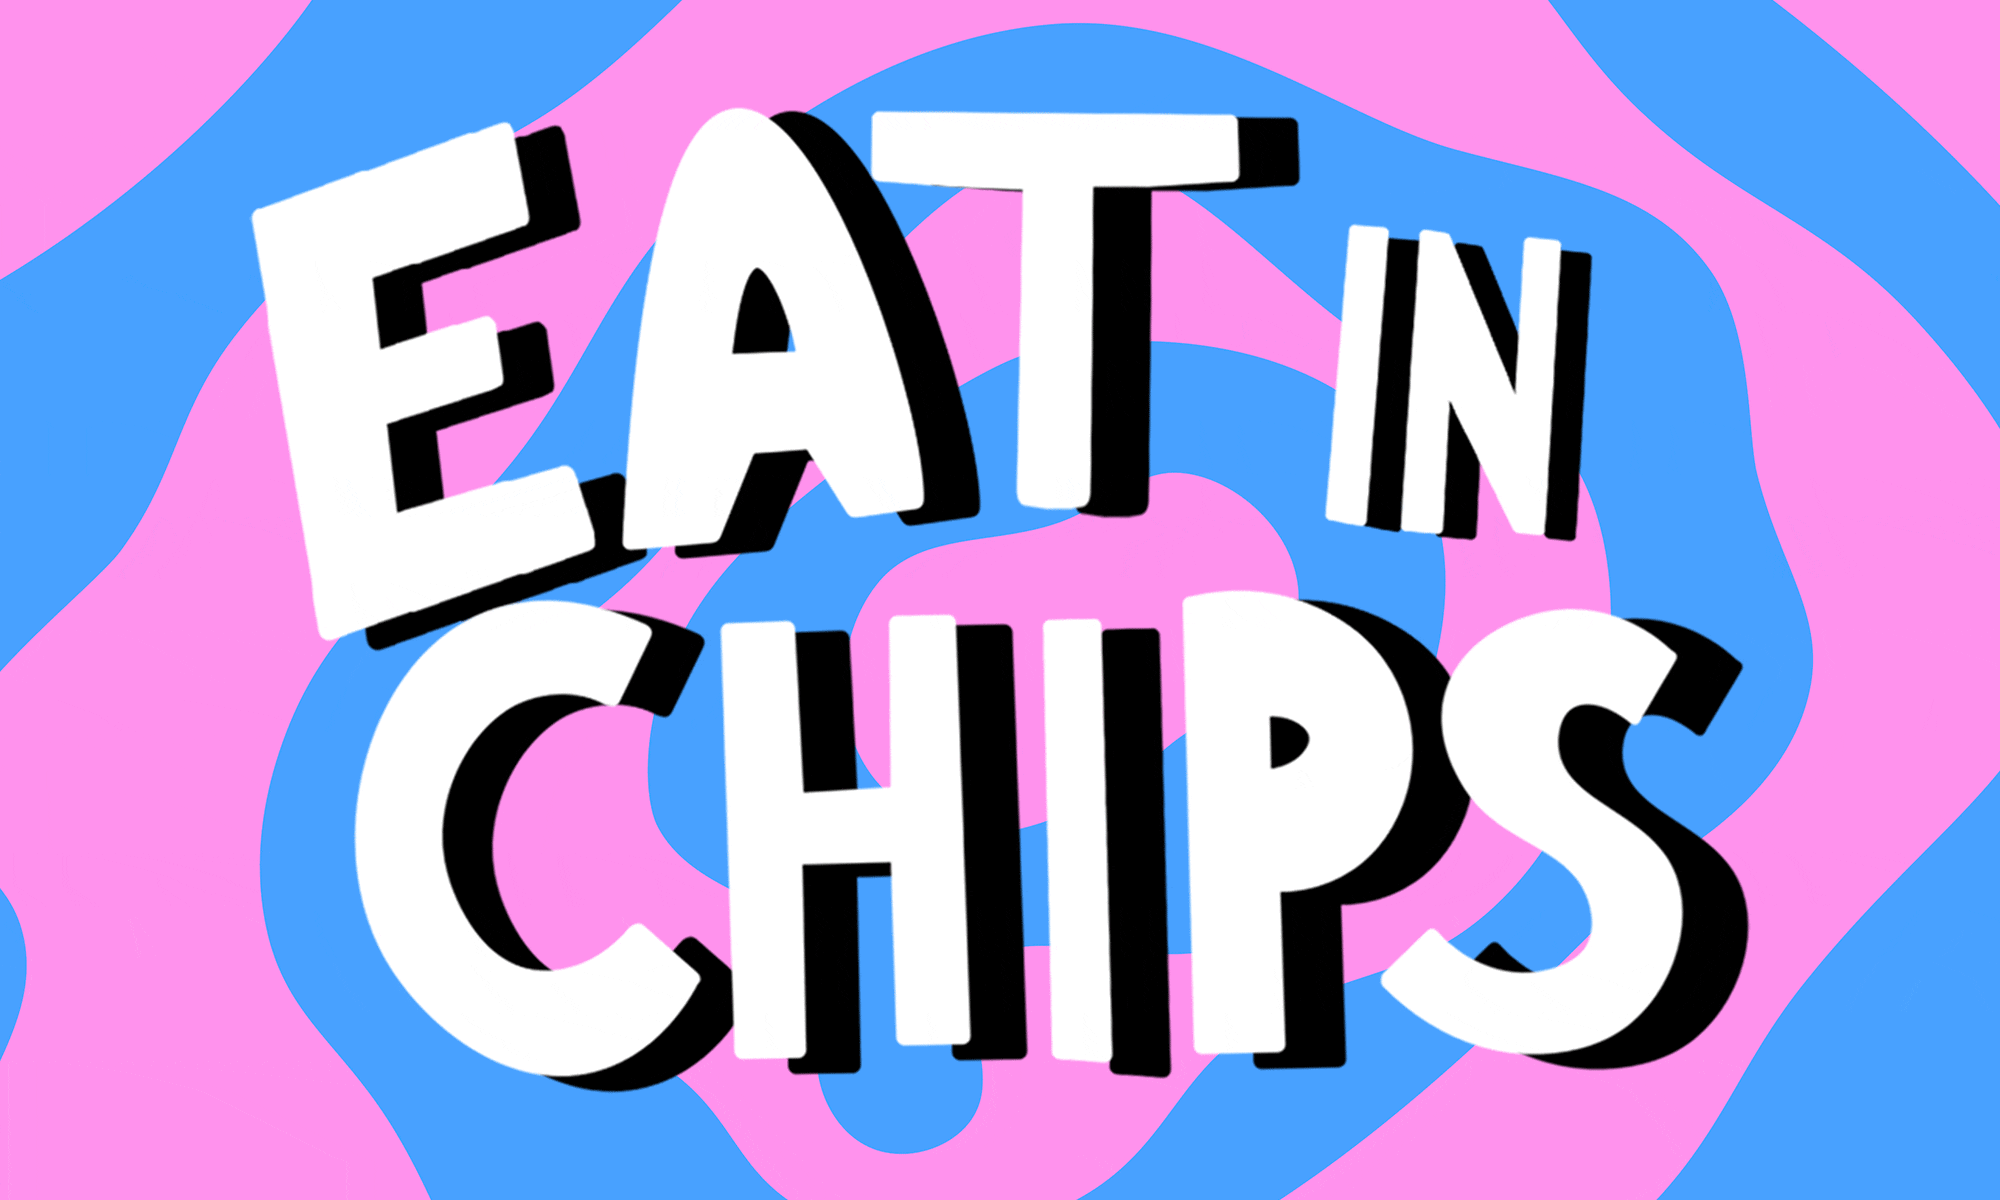 Eat in chips 